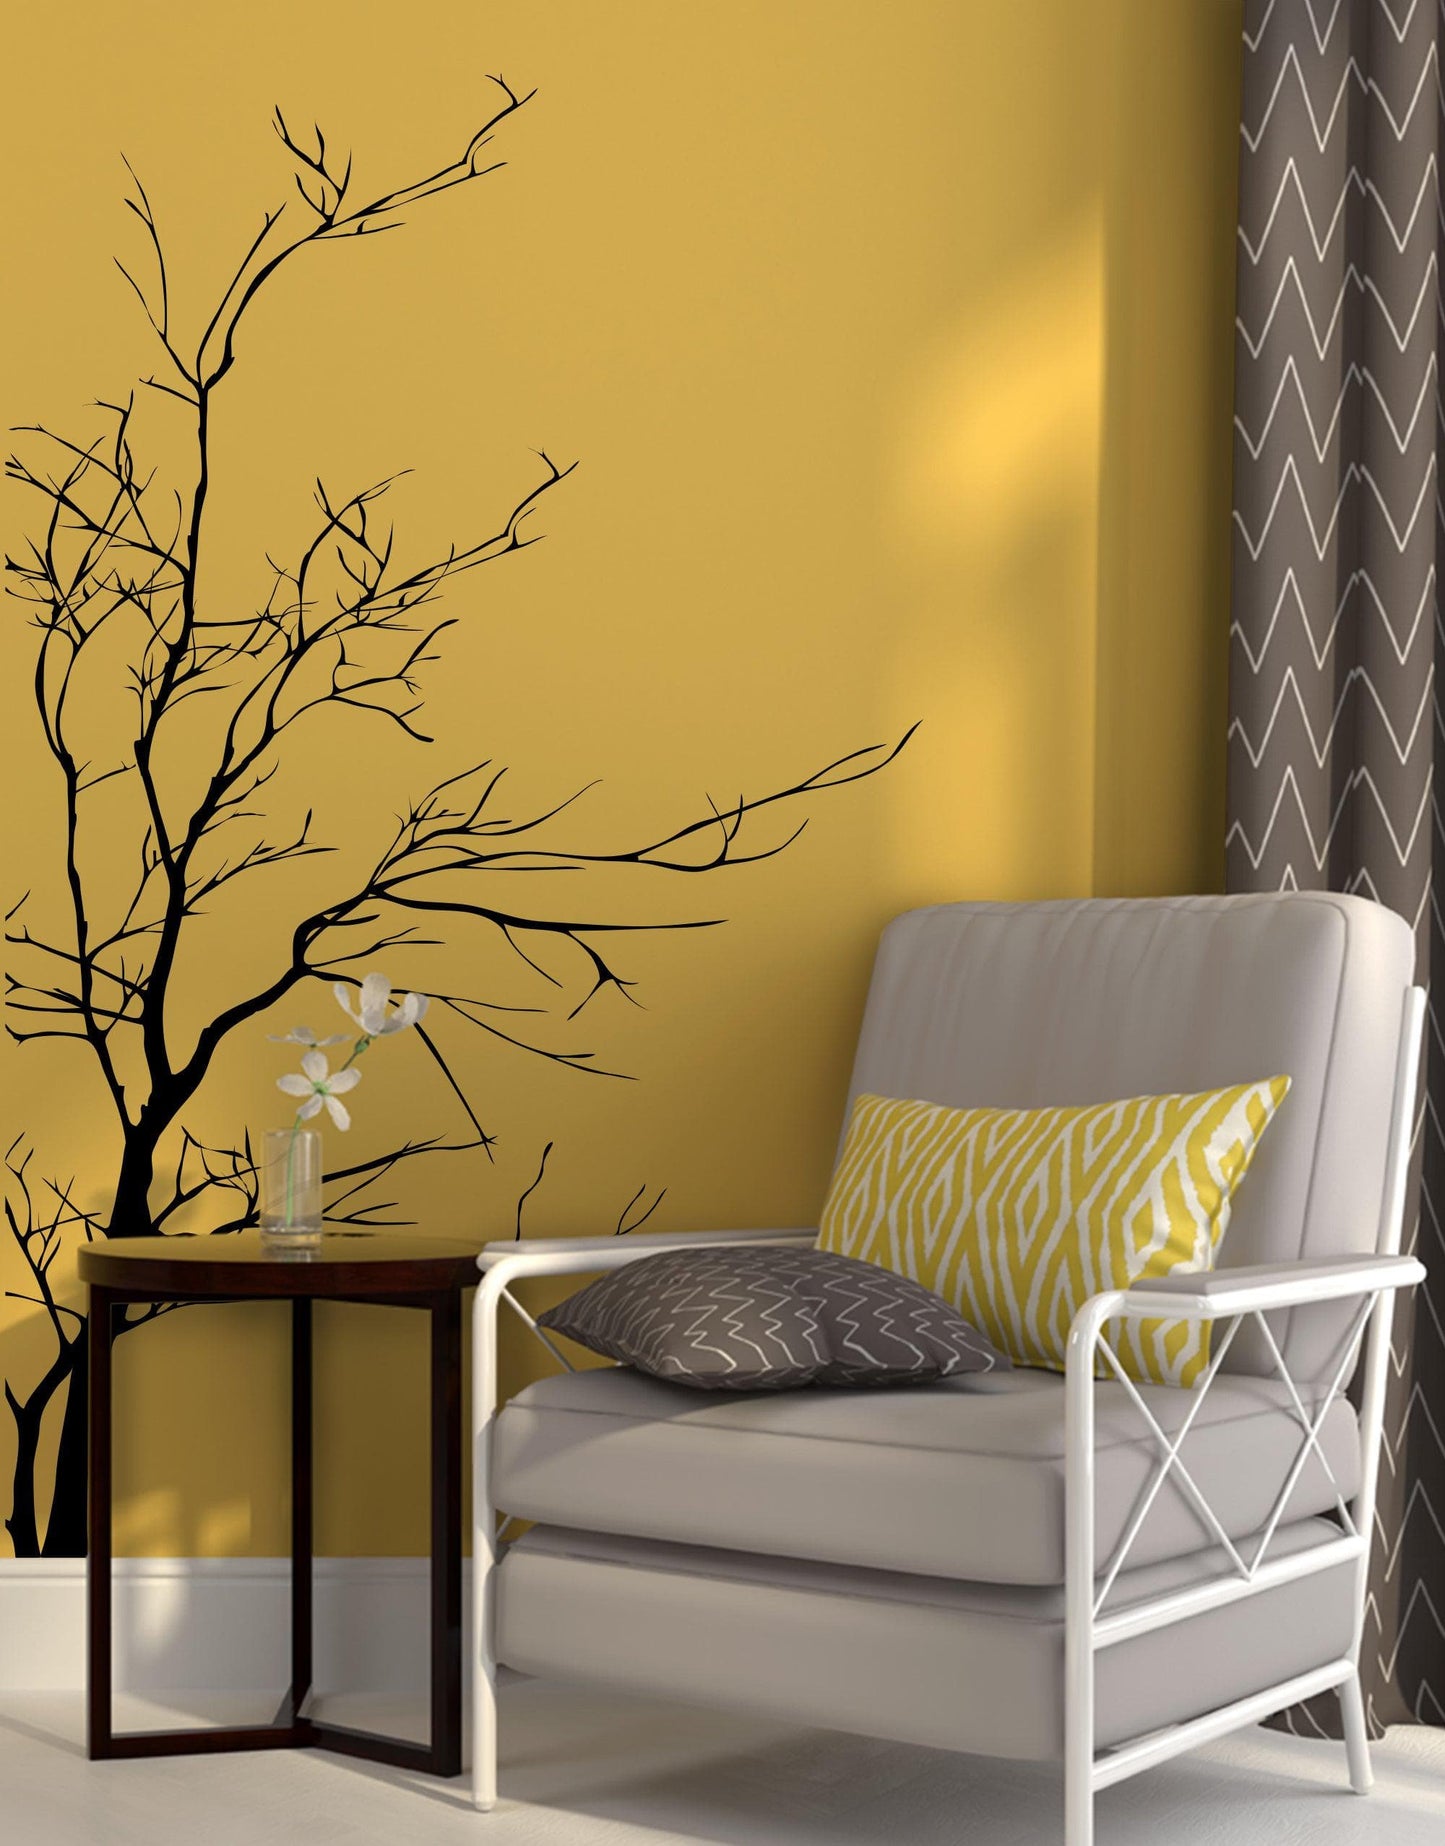 A black tree decal on a yellow wall  near a gray chair.